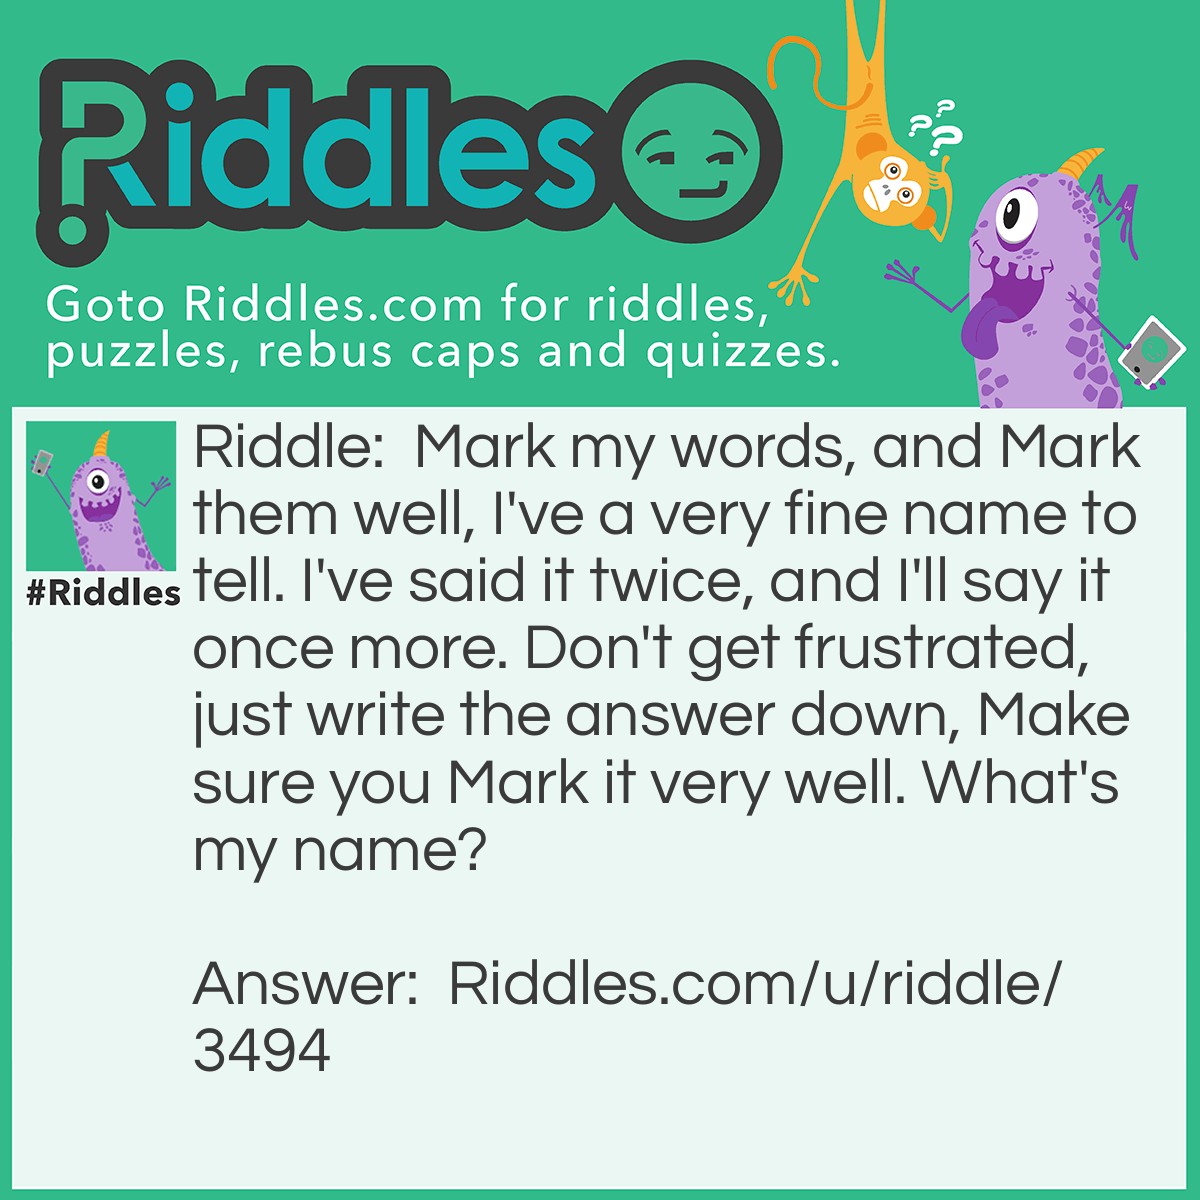 Riddle: Mark my words, and Mark them well, I've a very fine name to tell. I've said it twice, and I'll say it once more. Don't get frustrated, just write the answer down, Make sure you Mark it very well. What's my name? Answer: My name's Mark.